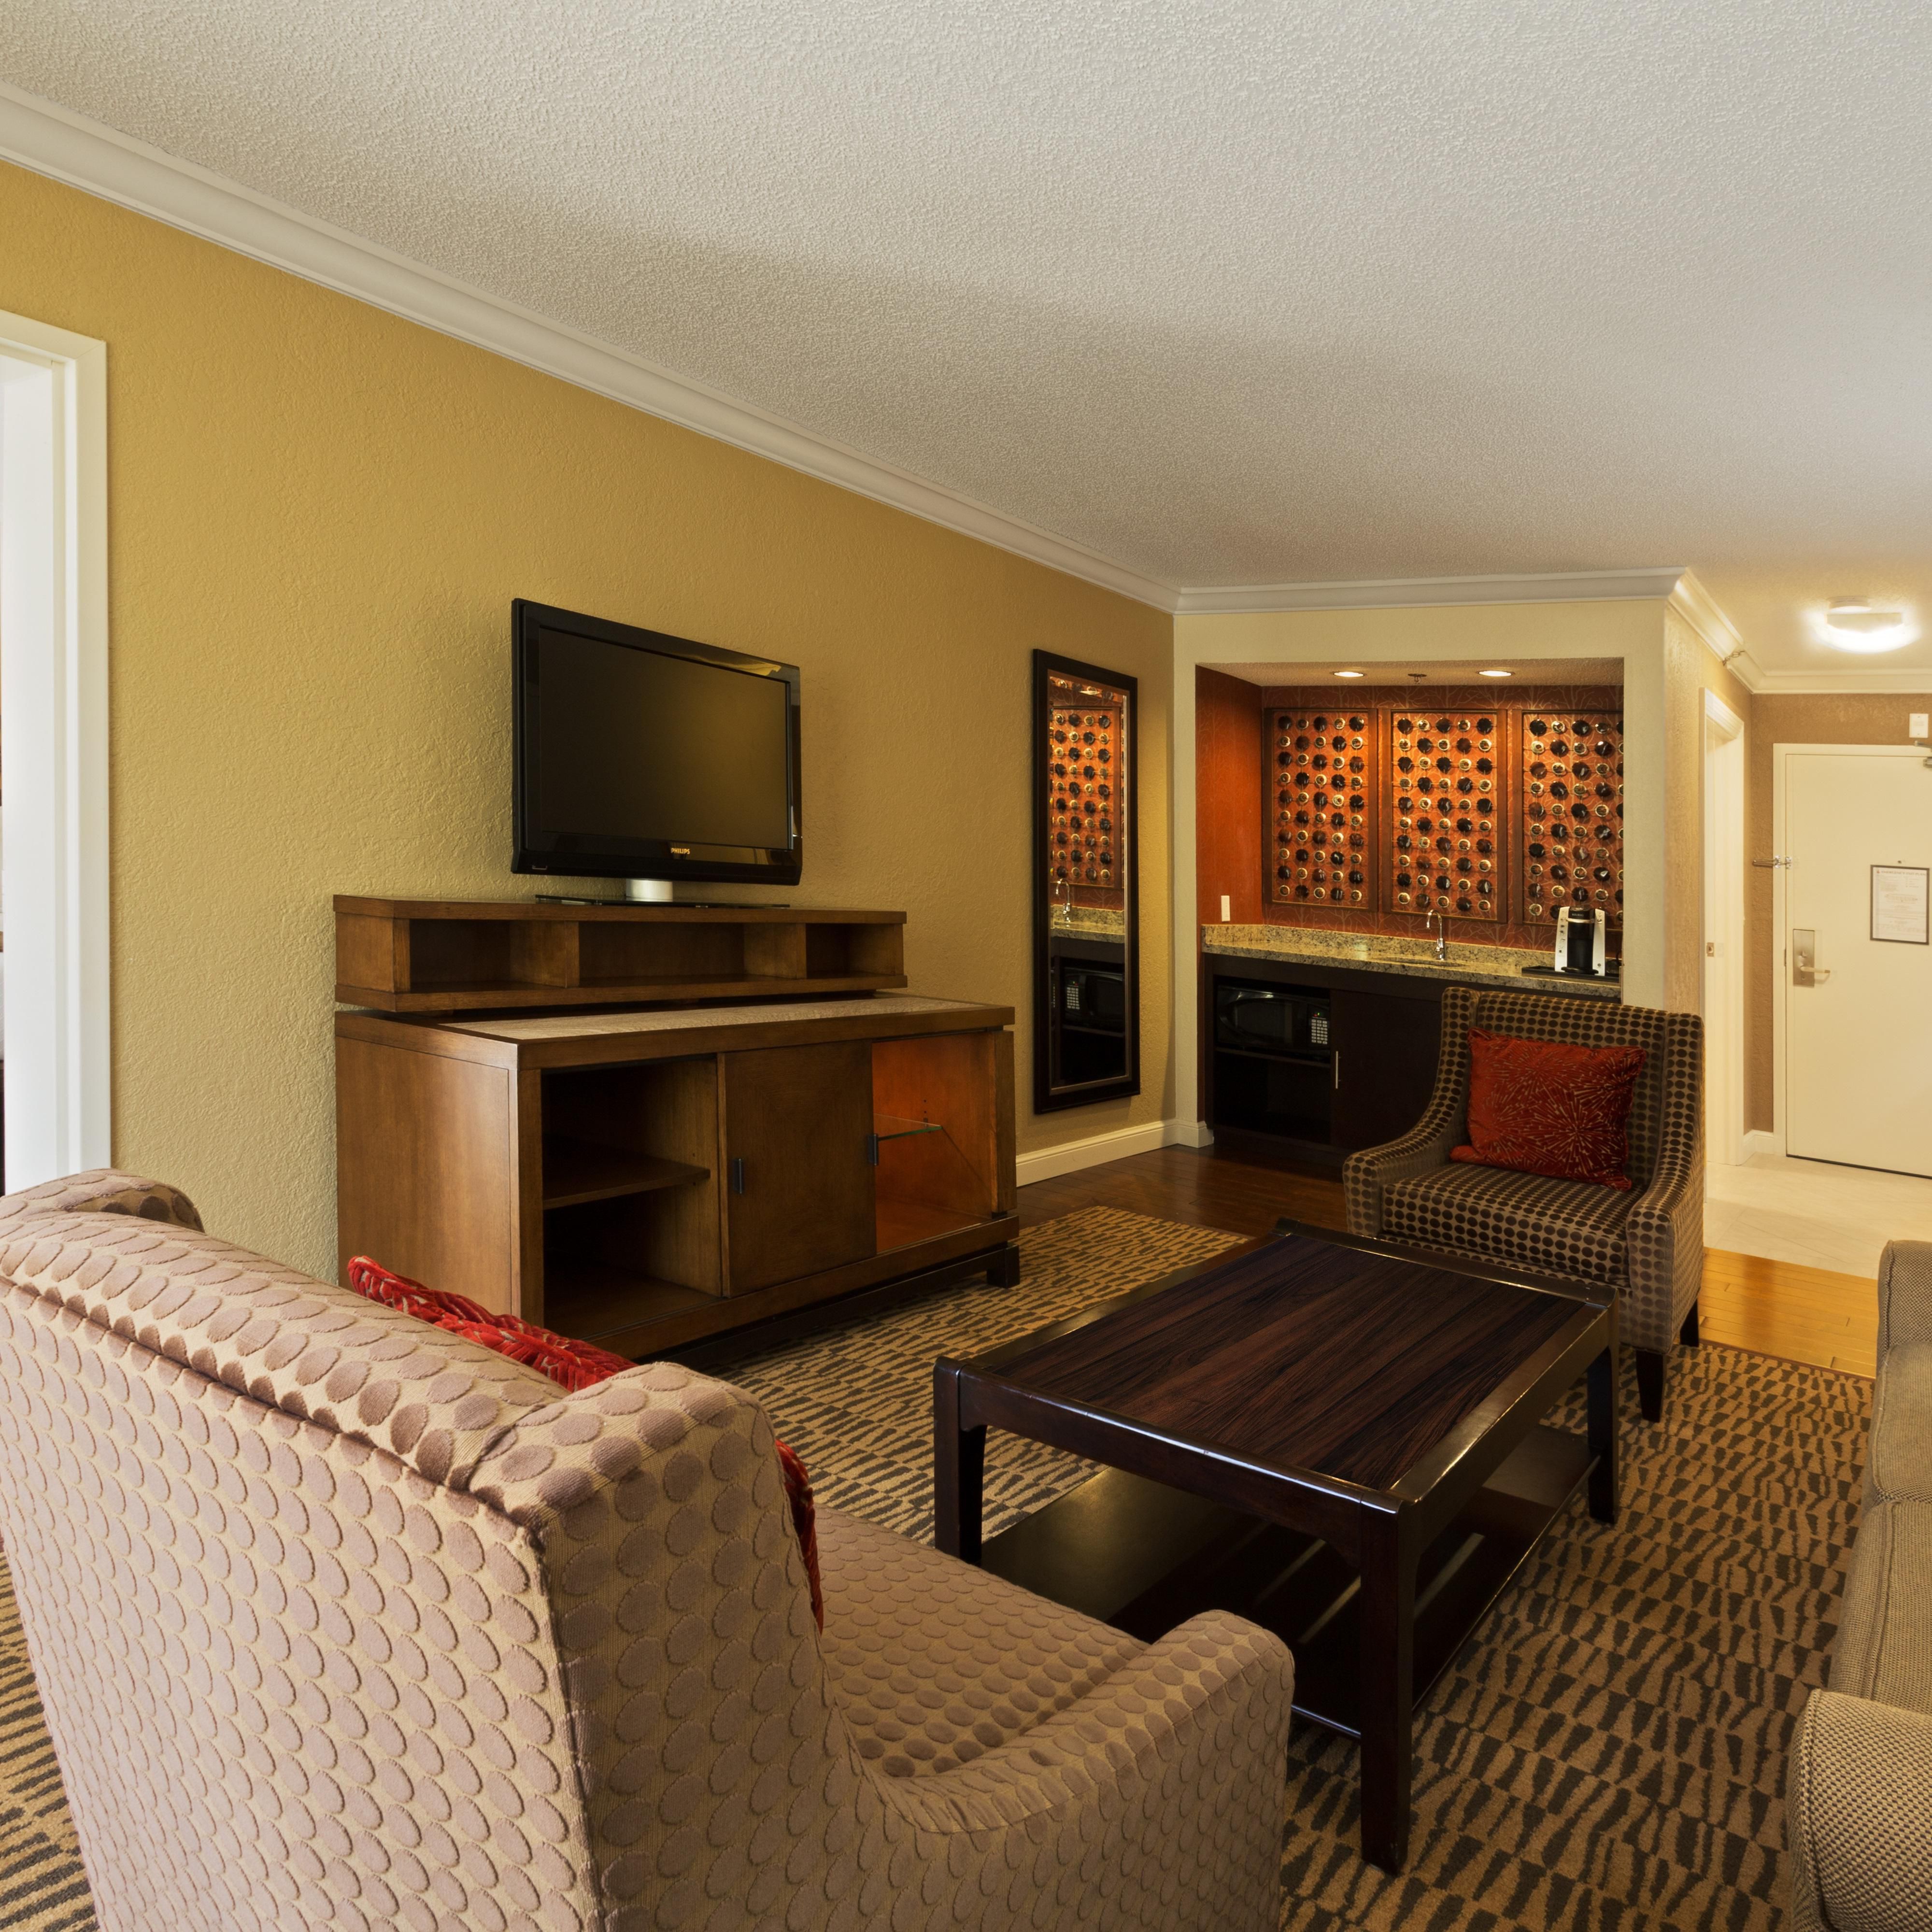 Enjoy your stay in our relaxing and spacious King Suite room.